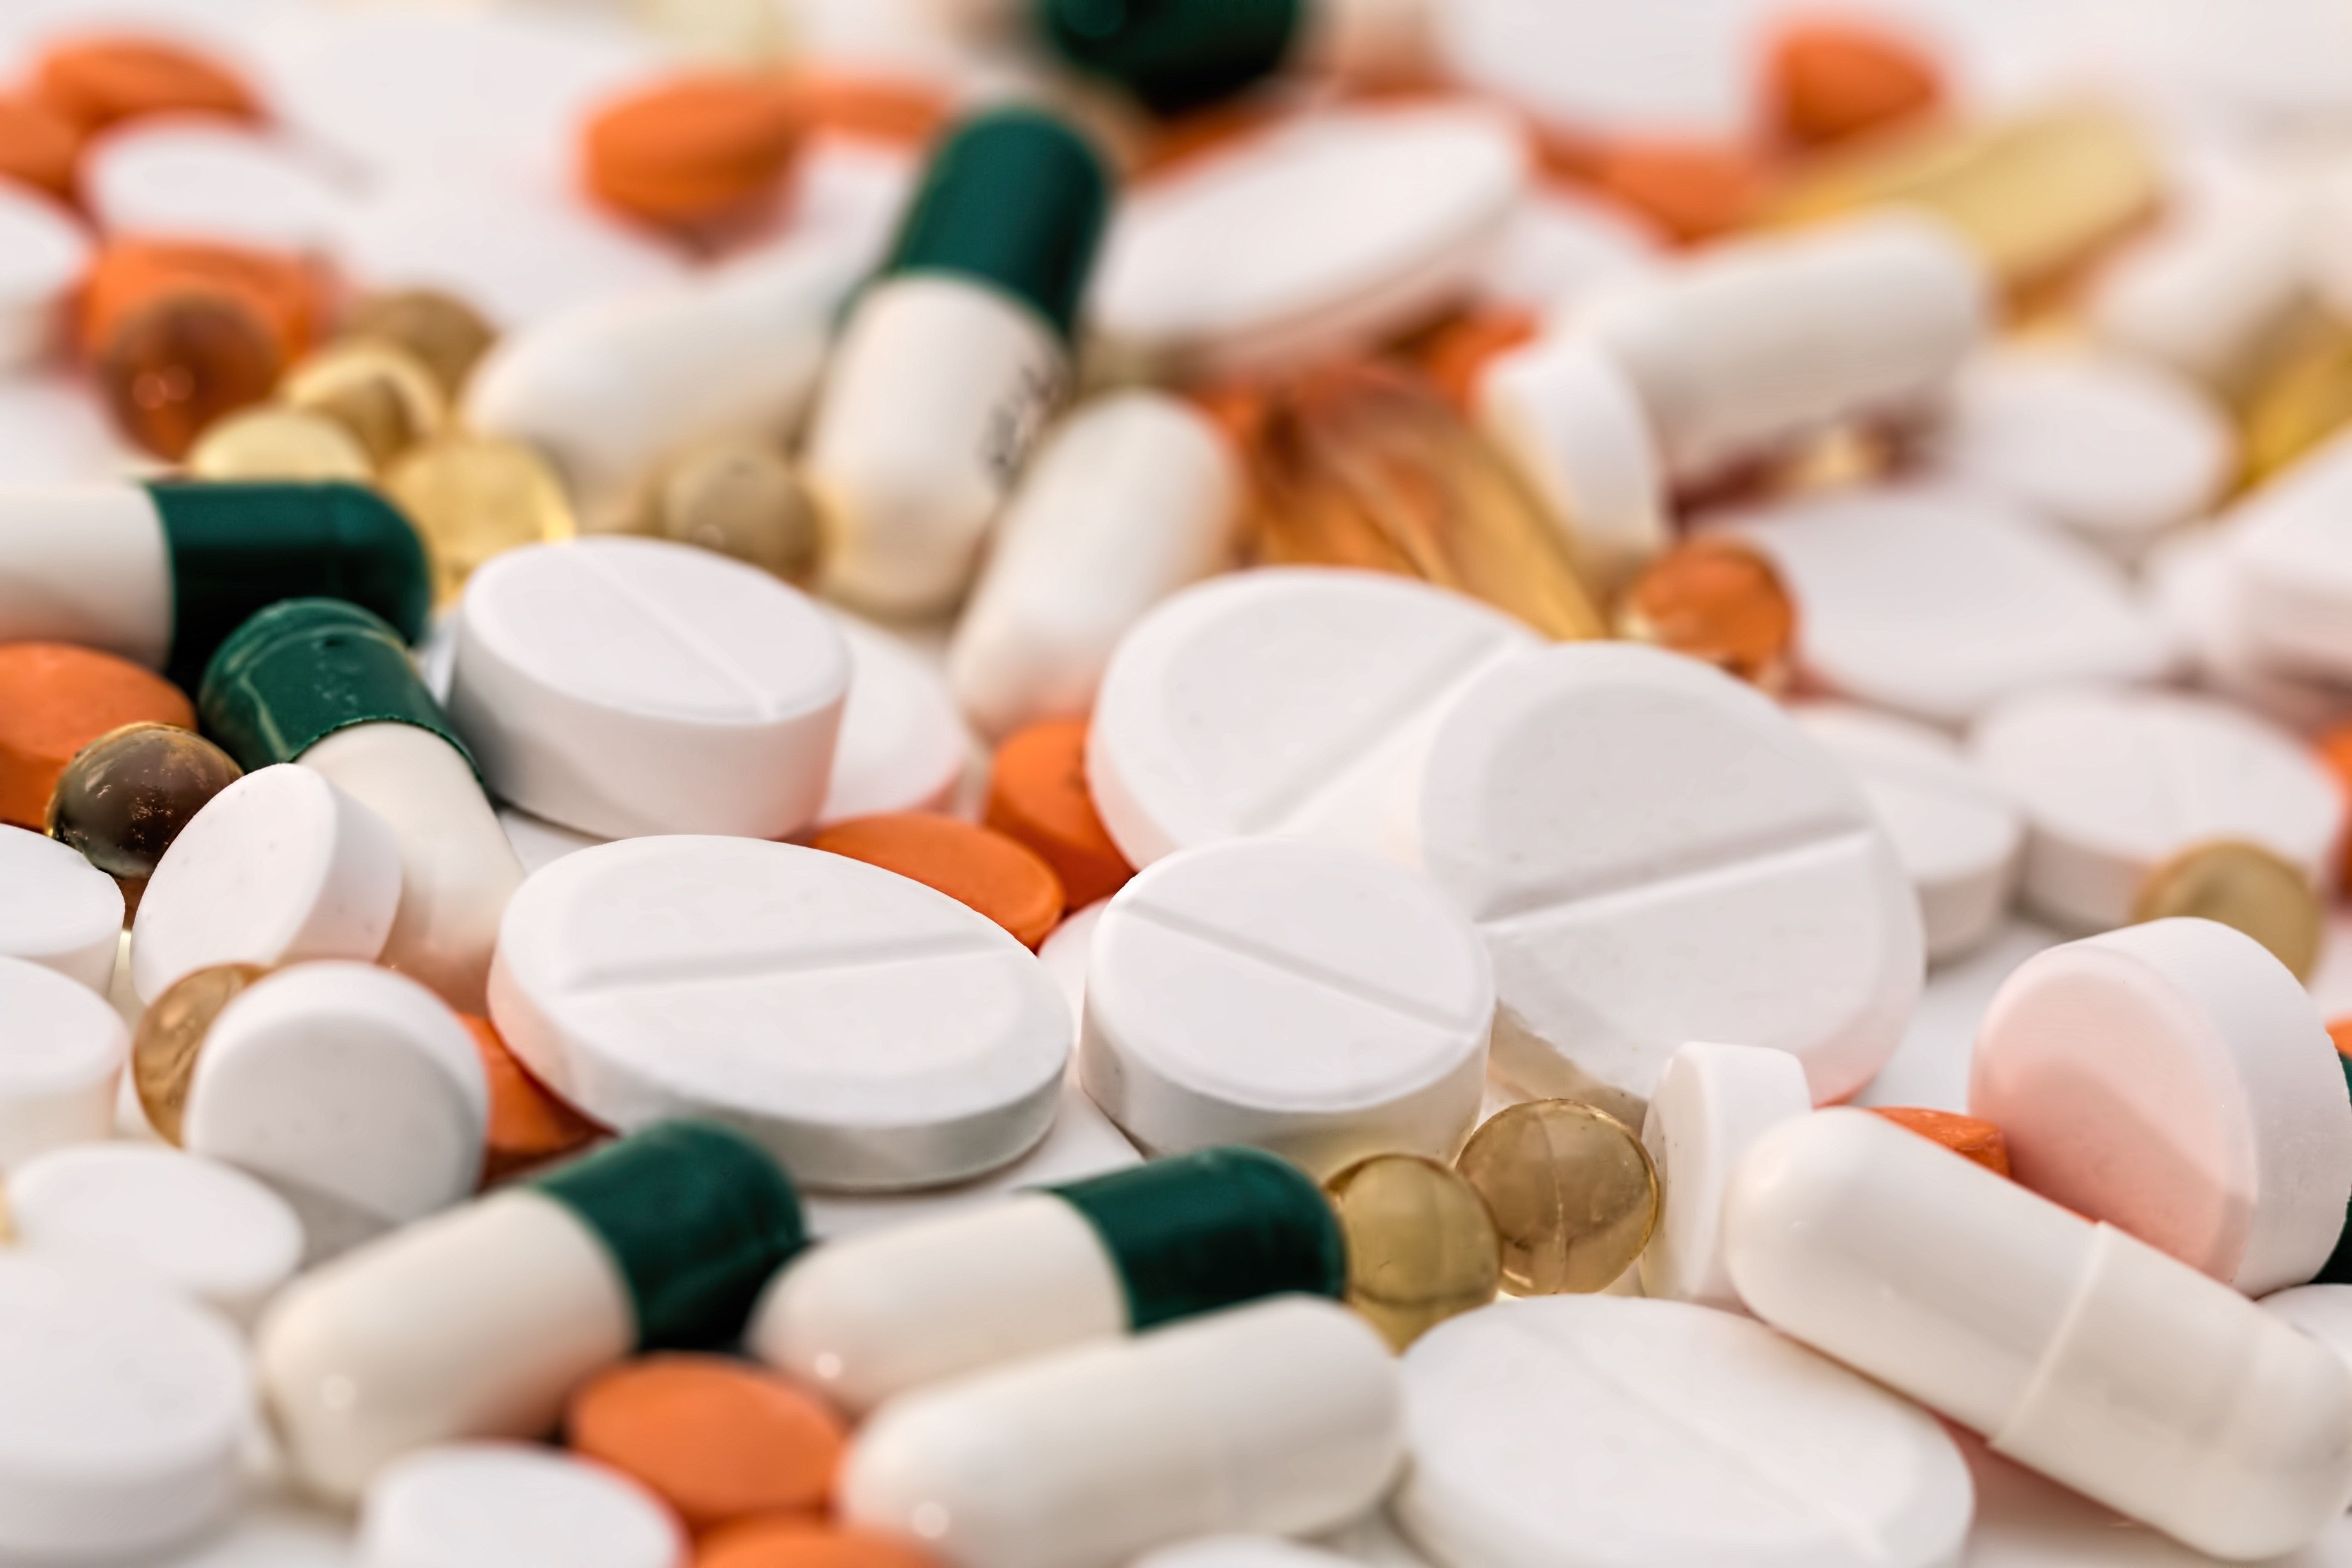 The Role of Medications for Borderline Personality Disorder